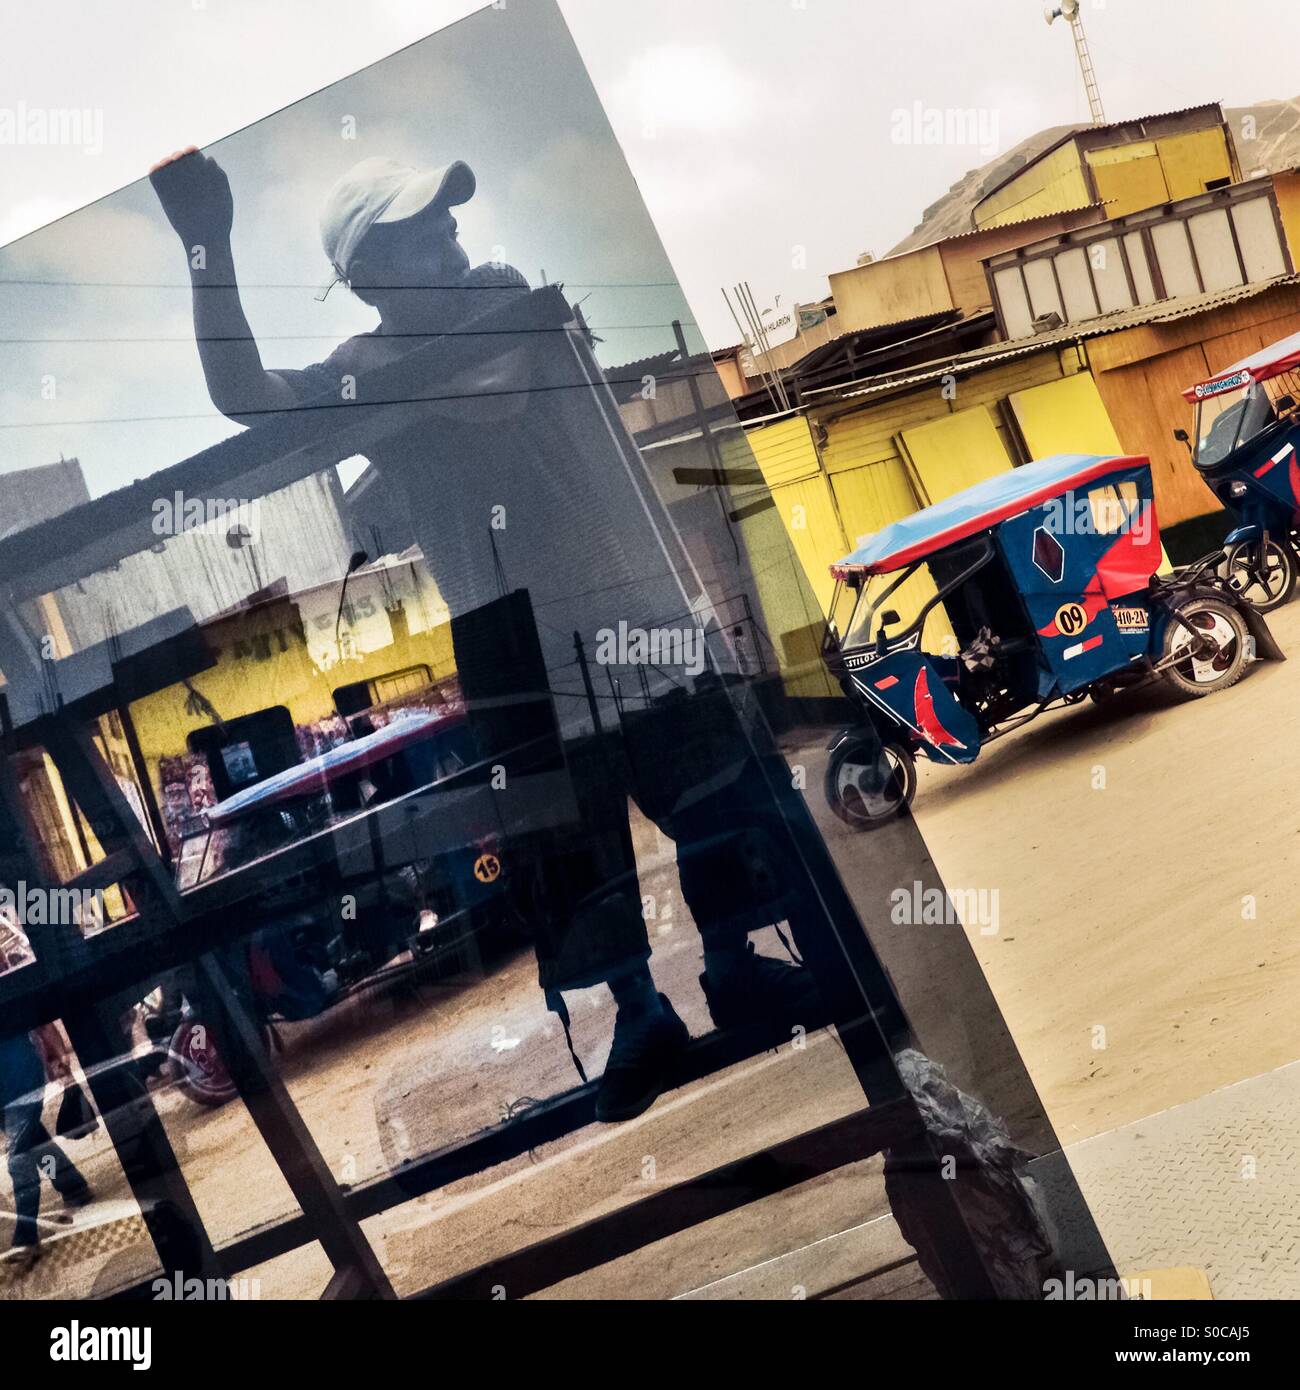 A Peruvian worker unloads a large window glass from a truck on the street of Pachacútec, a desert shantytown in Lima, Peru, 20 January 2015. Stock Photo